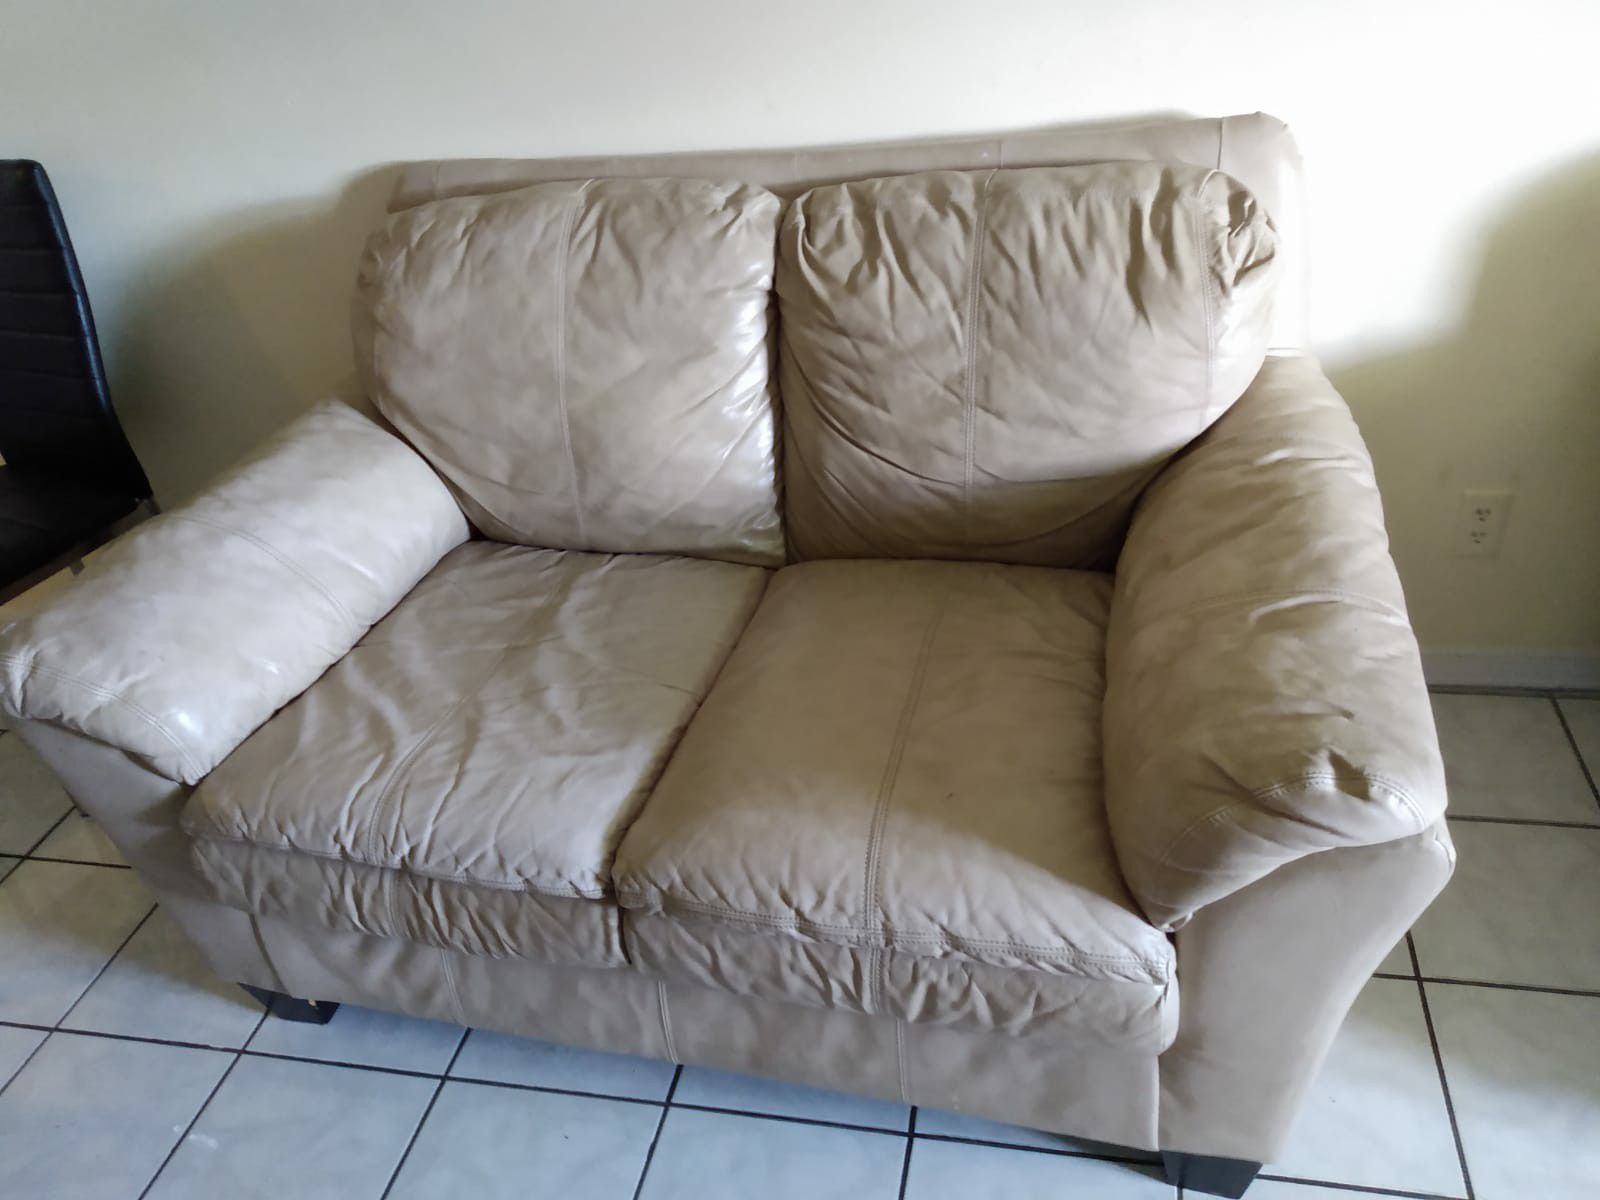 Free leather couch avalible to pick up tomorrow